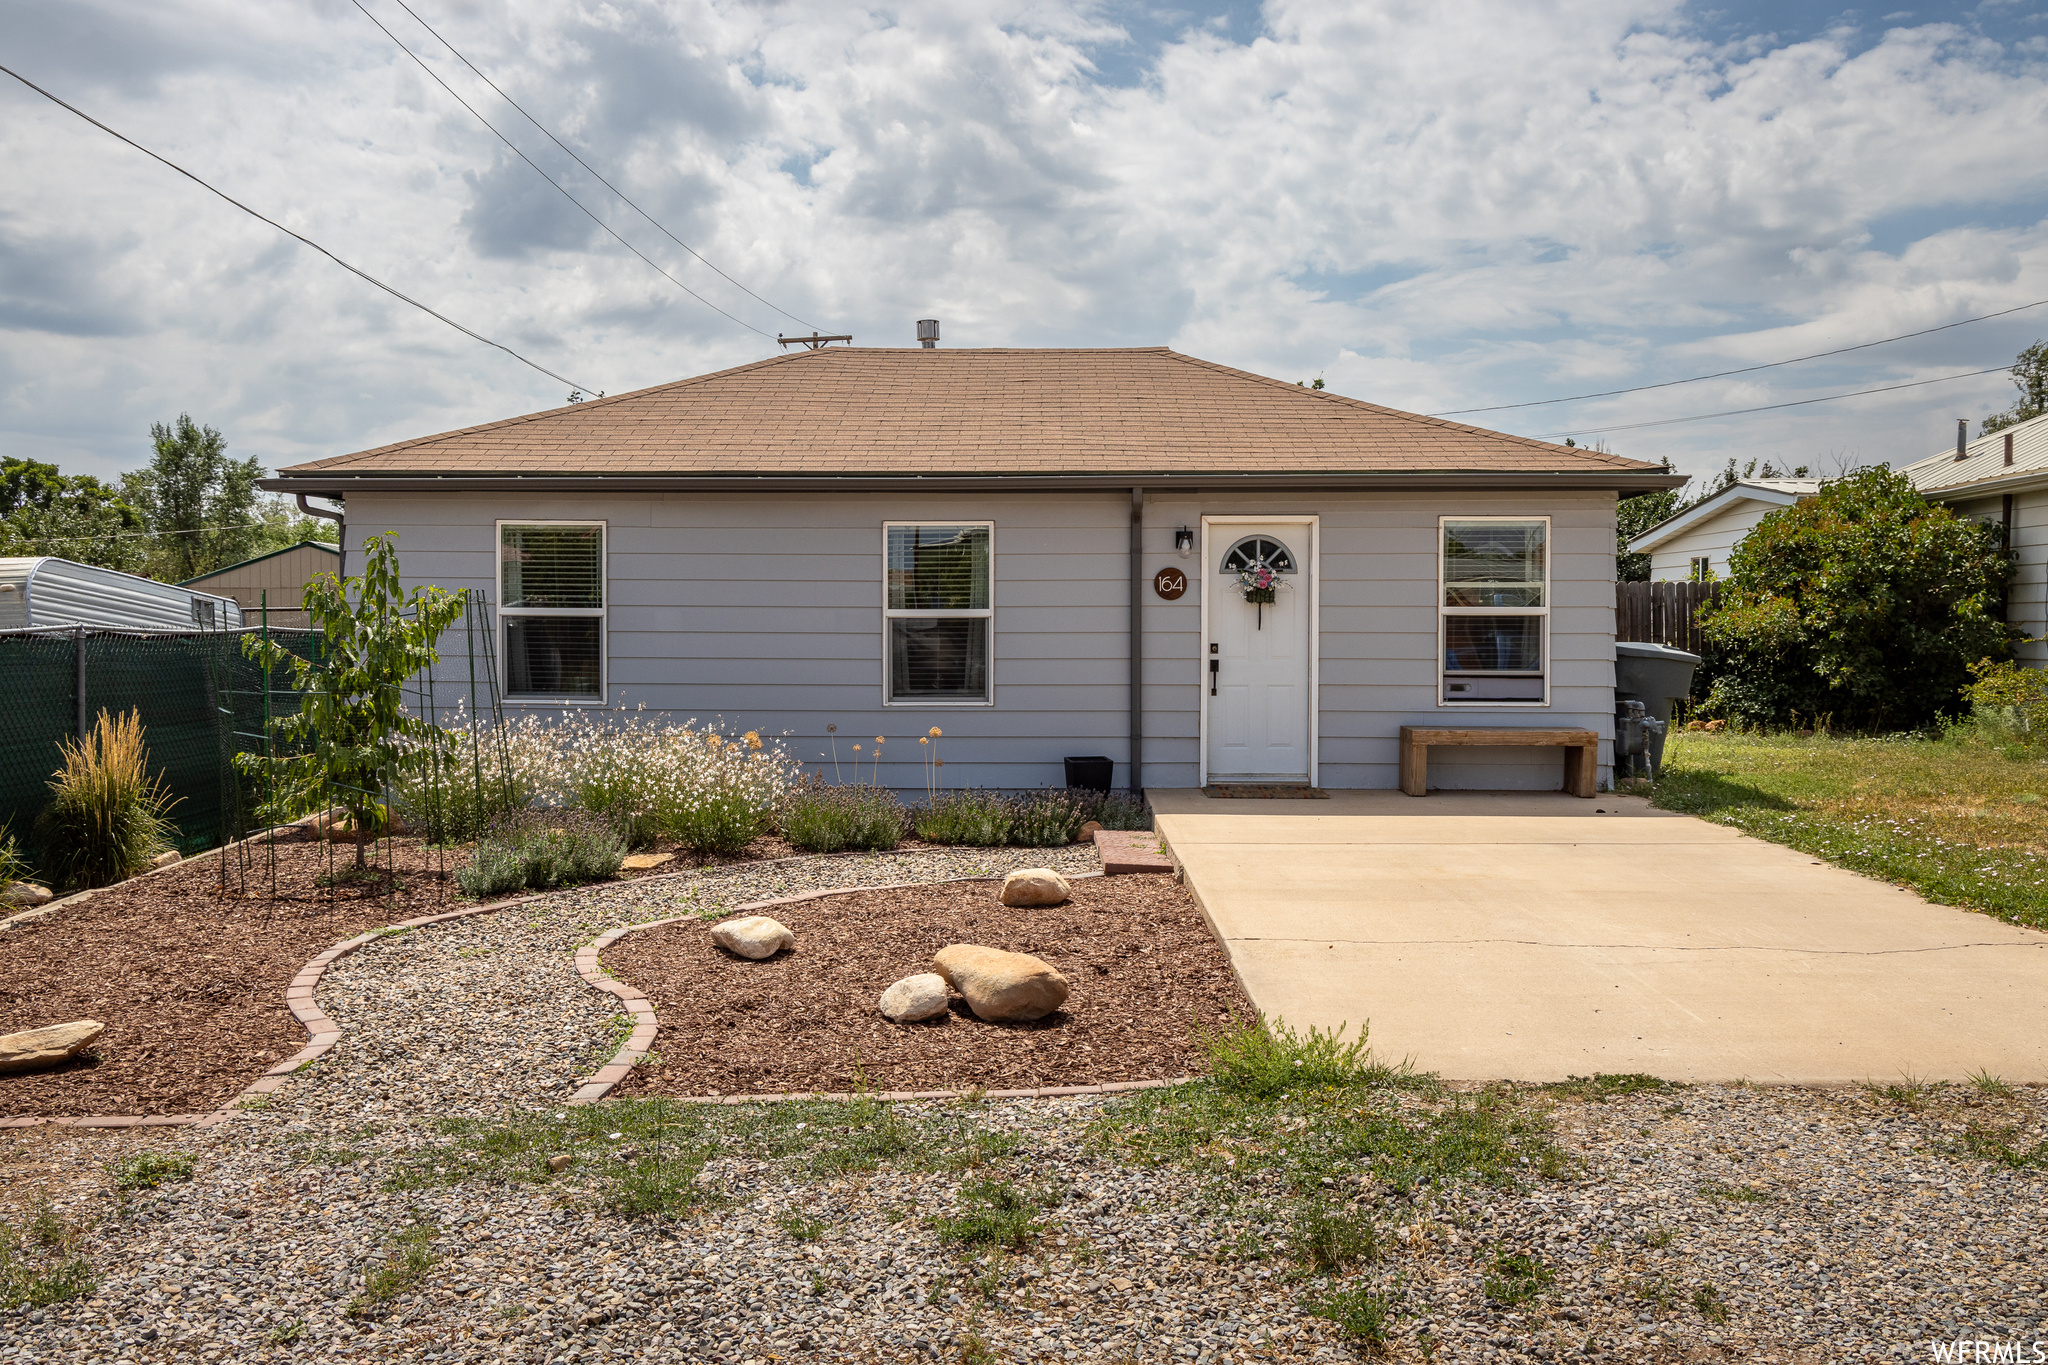 164 E 300 S, Monticello, Utah 84535, 2 Bedrooms Bedrooms, 6 Rooms Rooms,1 BathroomBathrooms,Residential,For sale,300,1896435